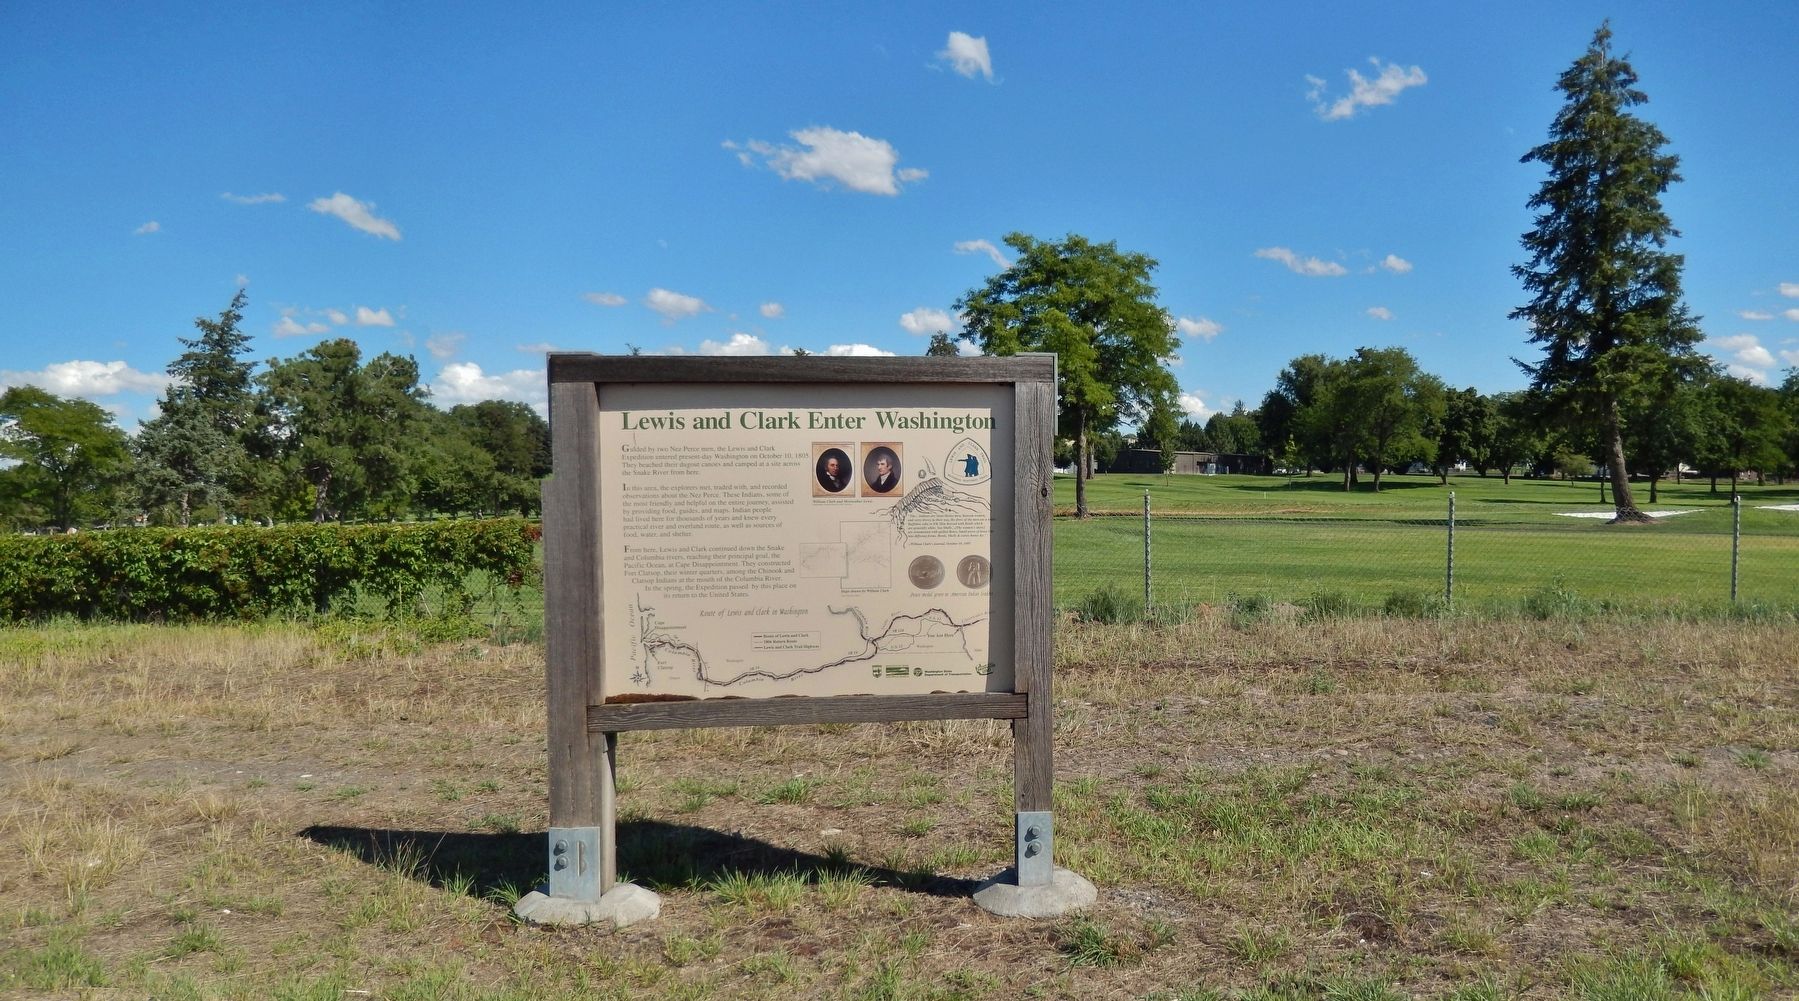 Lewis and Clark Enter Washington Marker (<i>wide view; Clarkston Golf & Country Club background</i>) image. Click for full size.